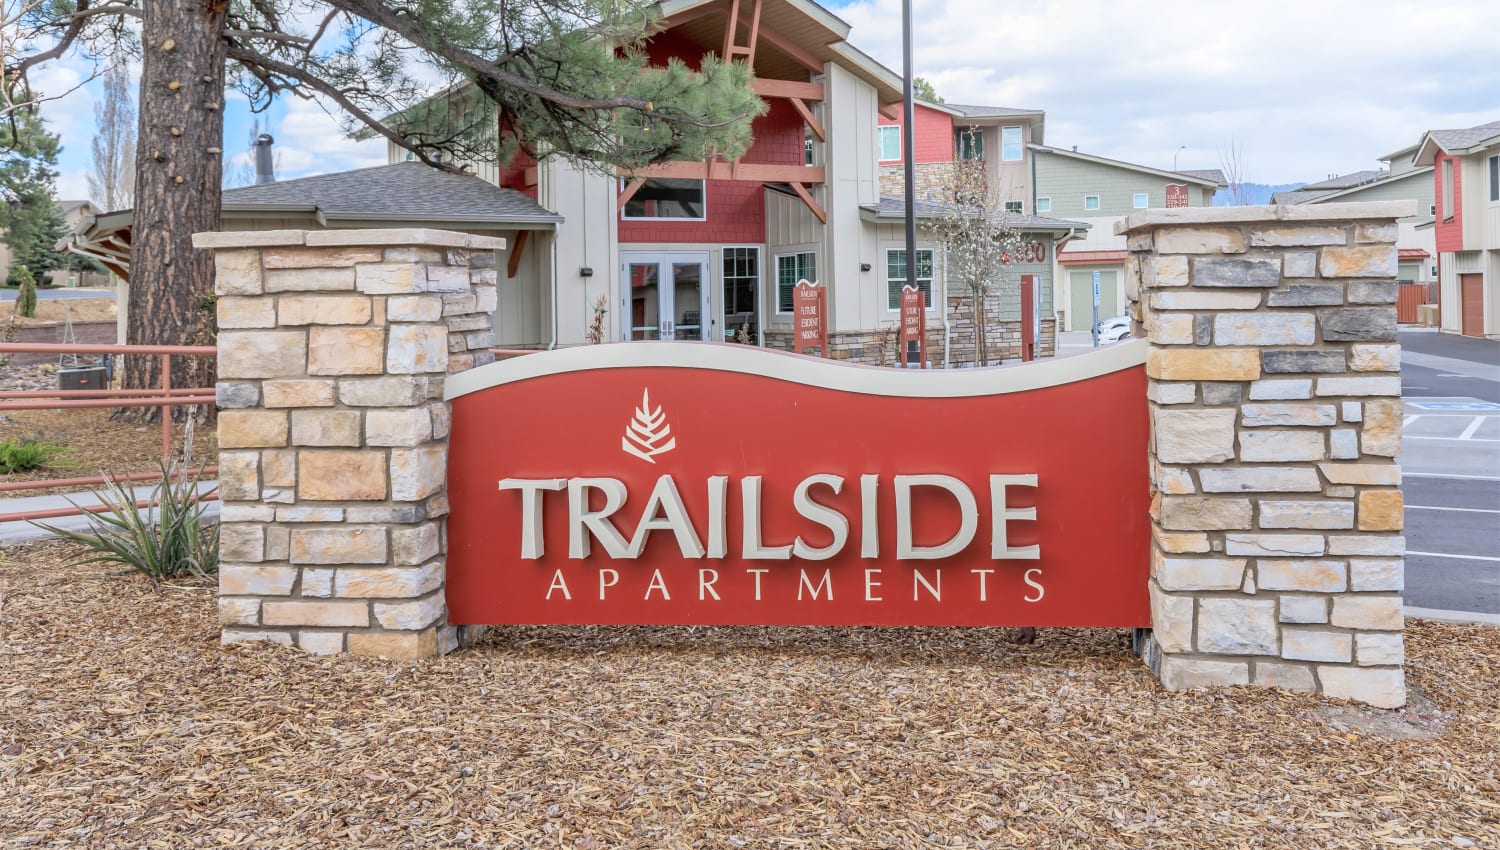 Monument sign at Trailside Apartments in Flagstaff, Arizona